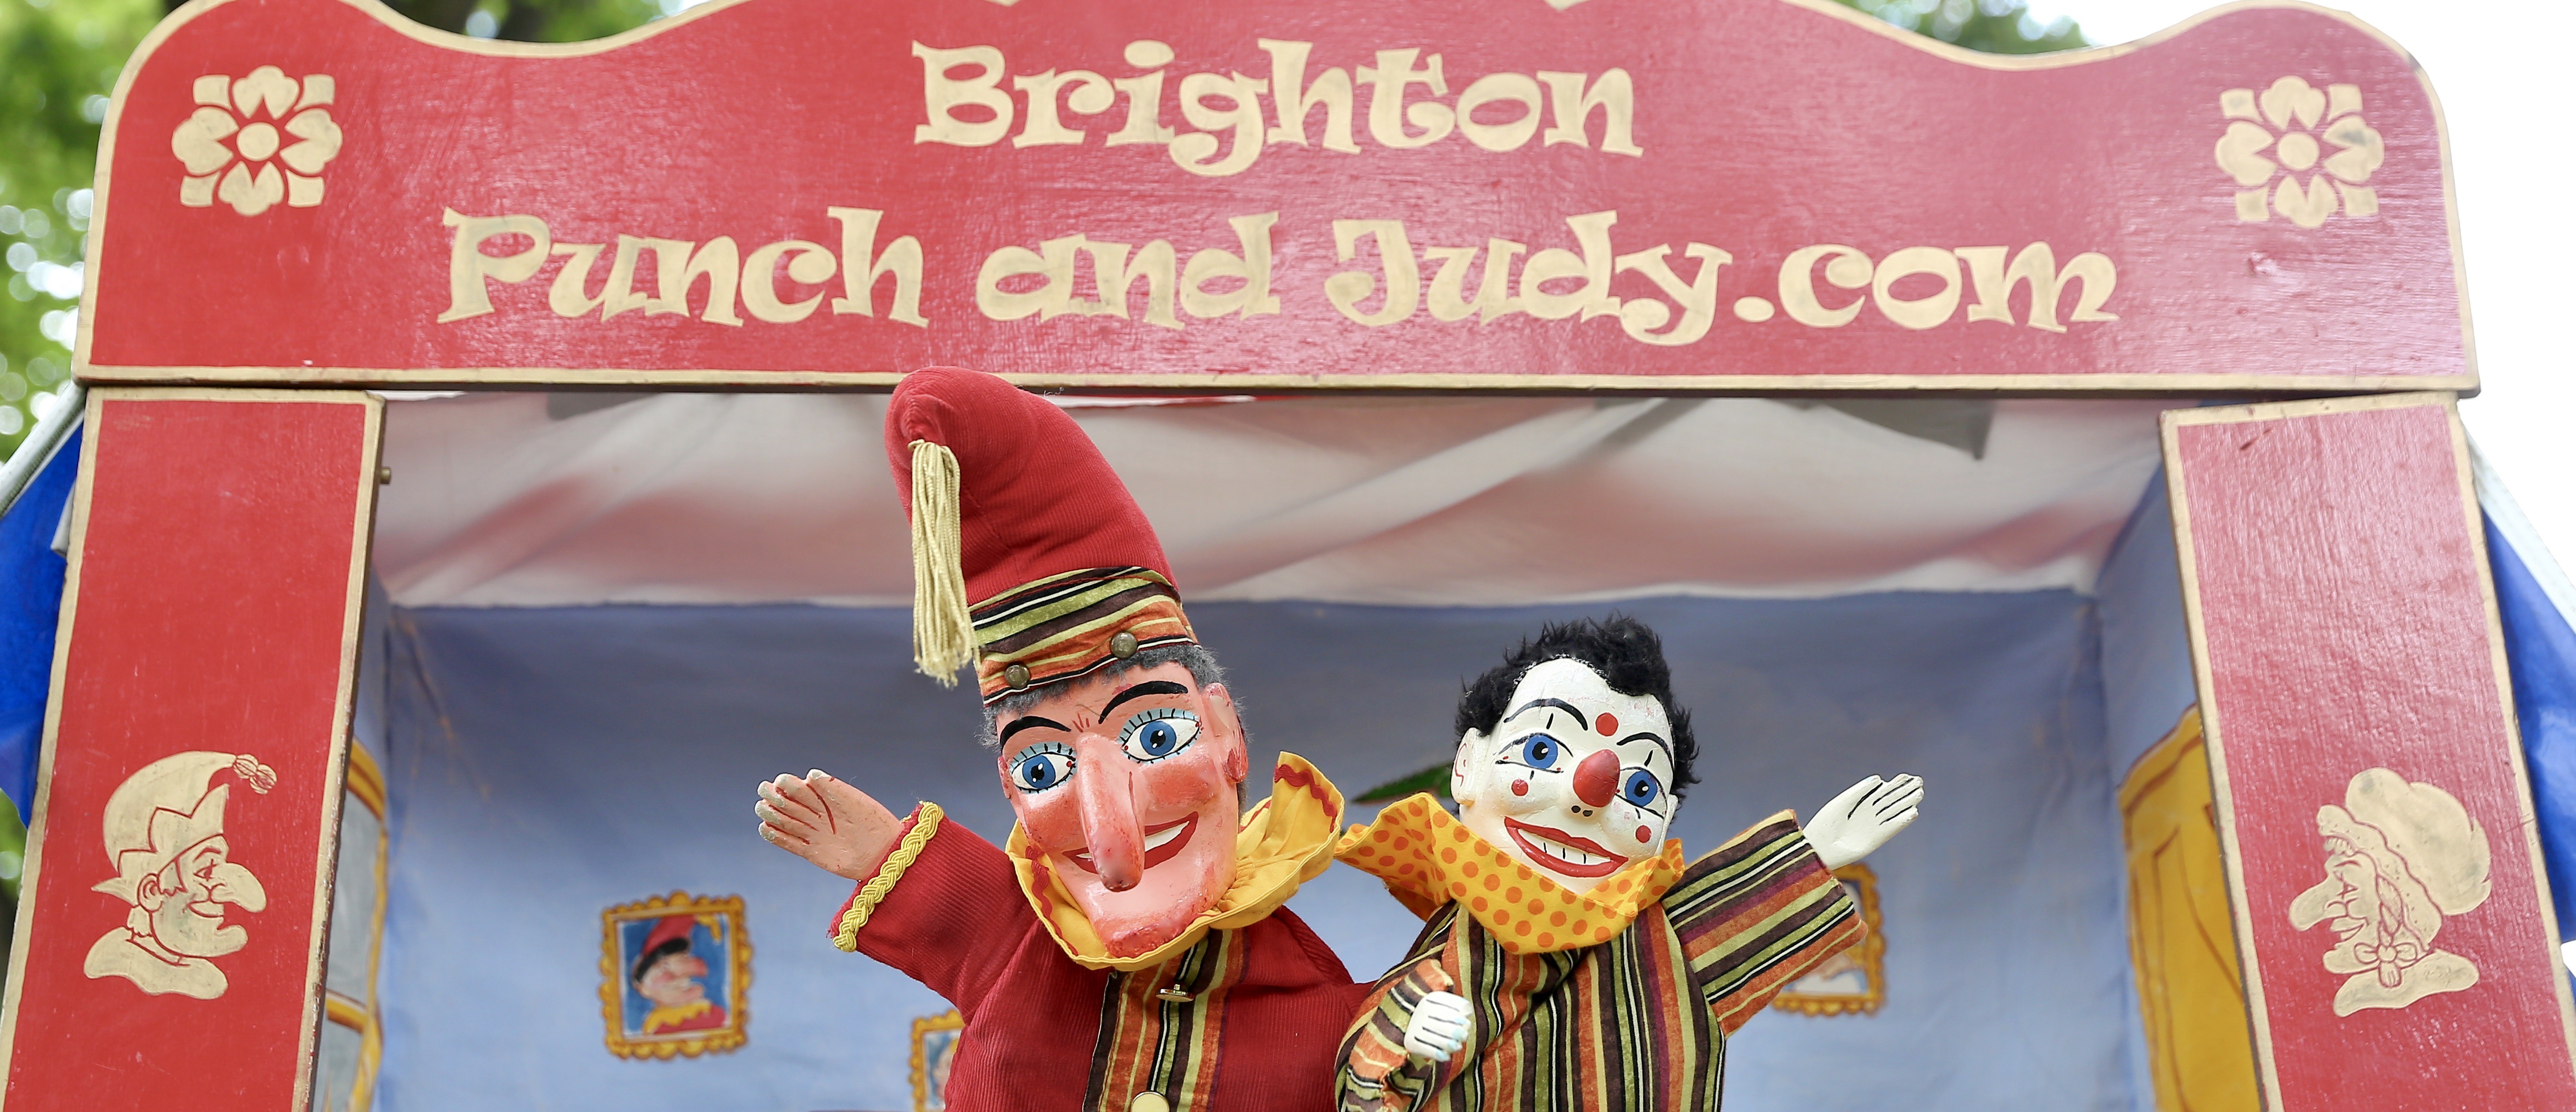 brighton Punch and Judy Puppet Show West Sussex 